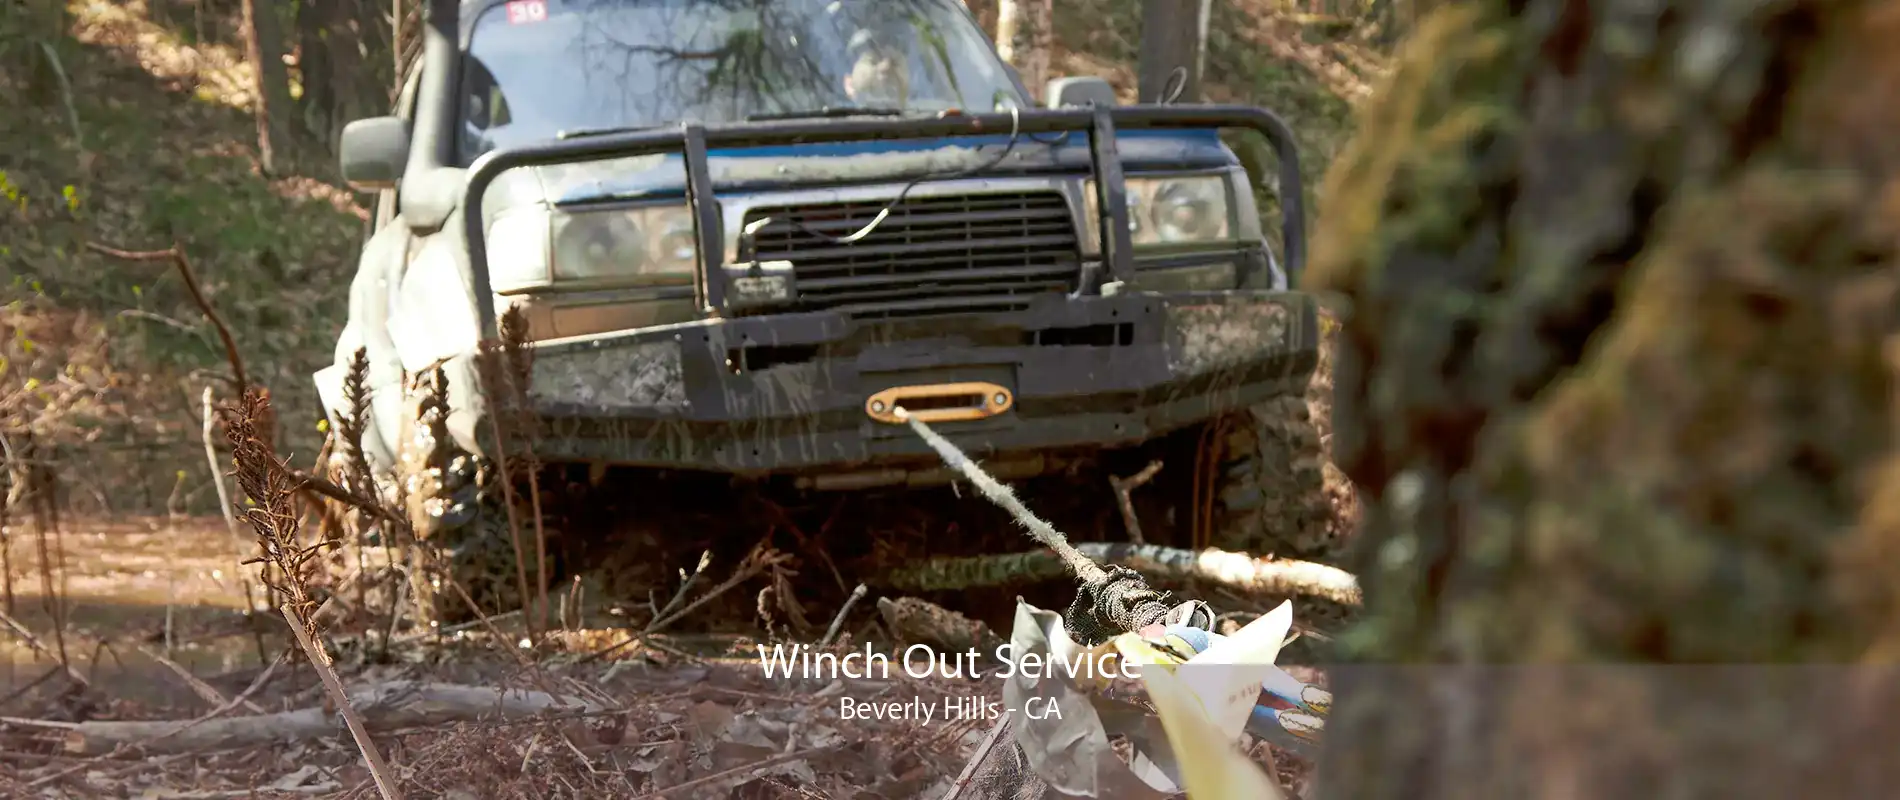 Winch Out Service Beverly Hills - CA